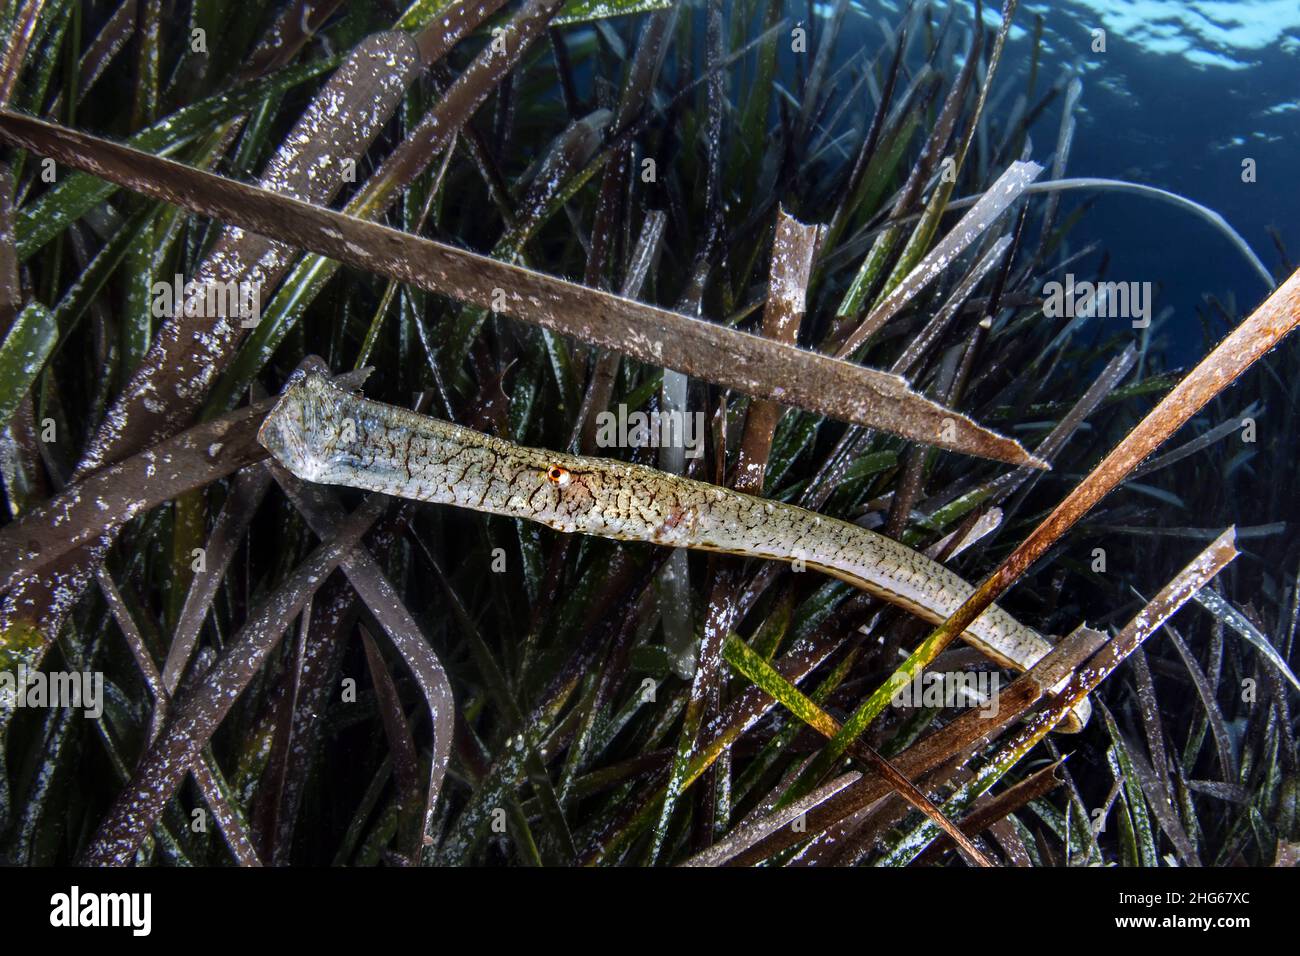 A broad-nosed pipefish (Syngnathus typhle) swims perfectly camouflaged in the Neptune grass, Italy Stock Photo